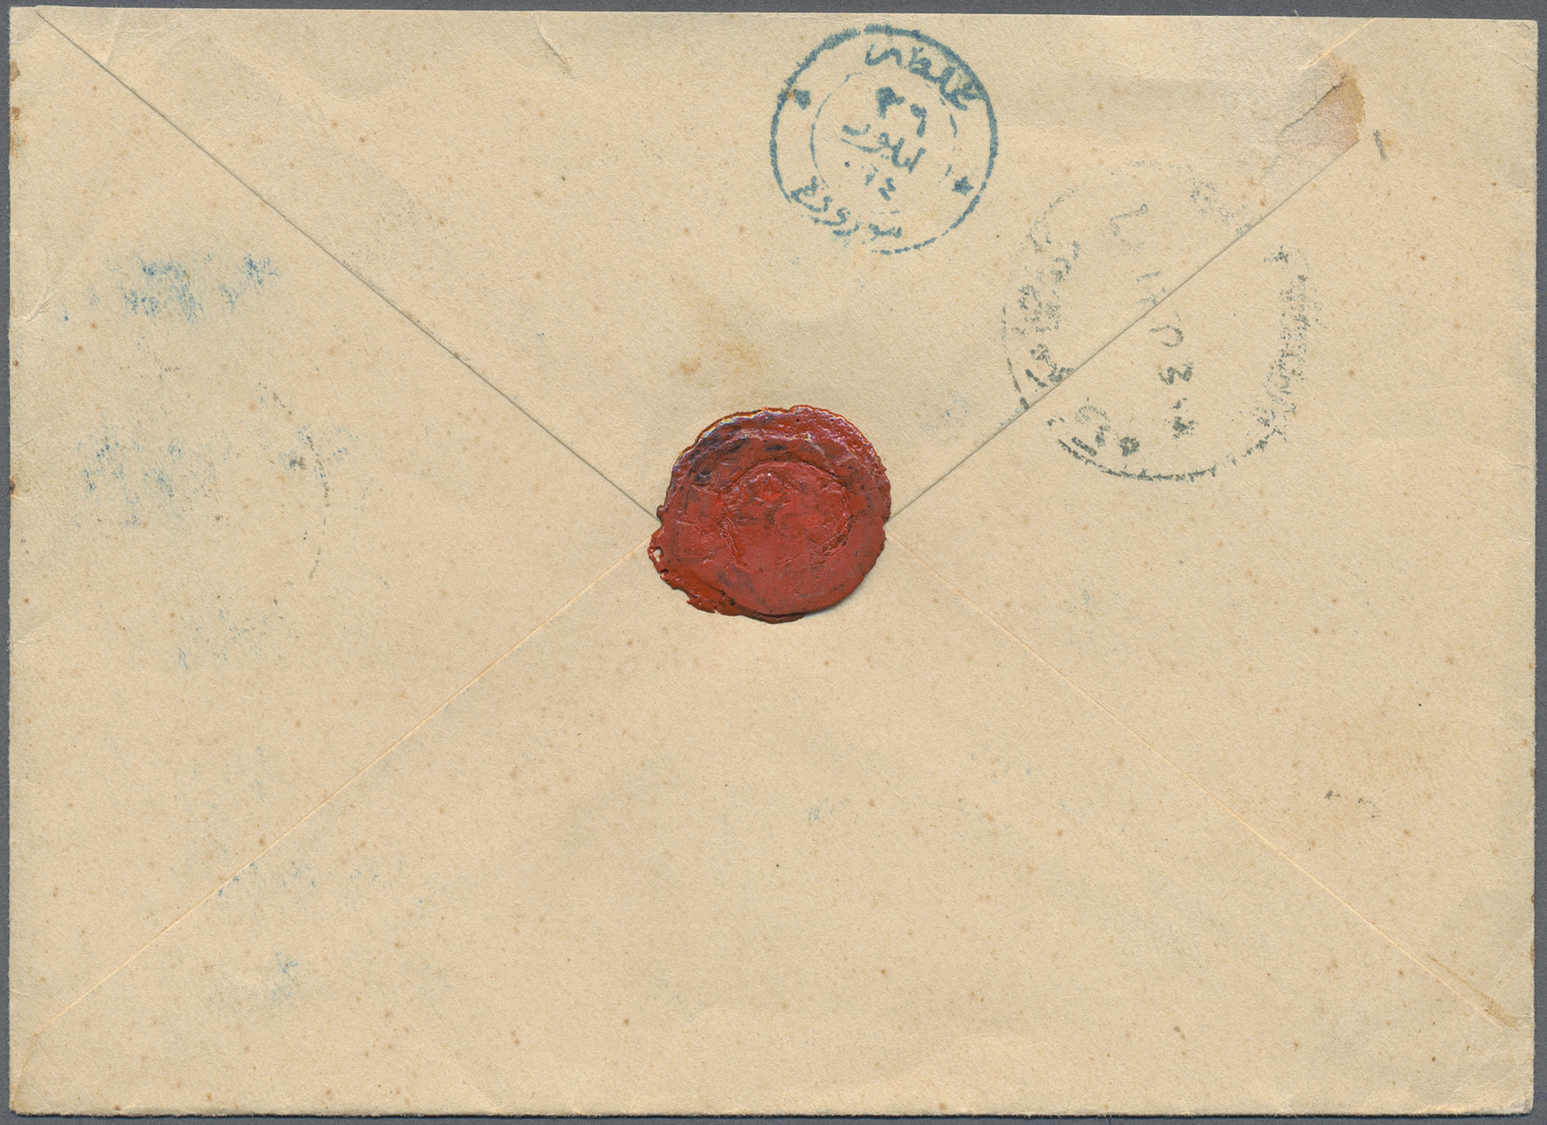 Br Syrien: 1898 Sep. 30, "Alep" Cds. With Stars Tying 2 Piasters Ochre Ottoman To Istanbul - Turkey Arrival And Wax Seal - Syrie